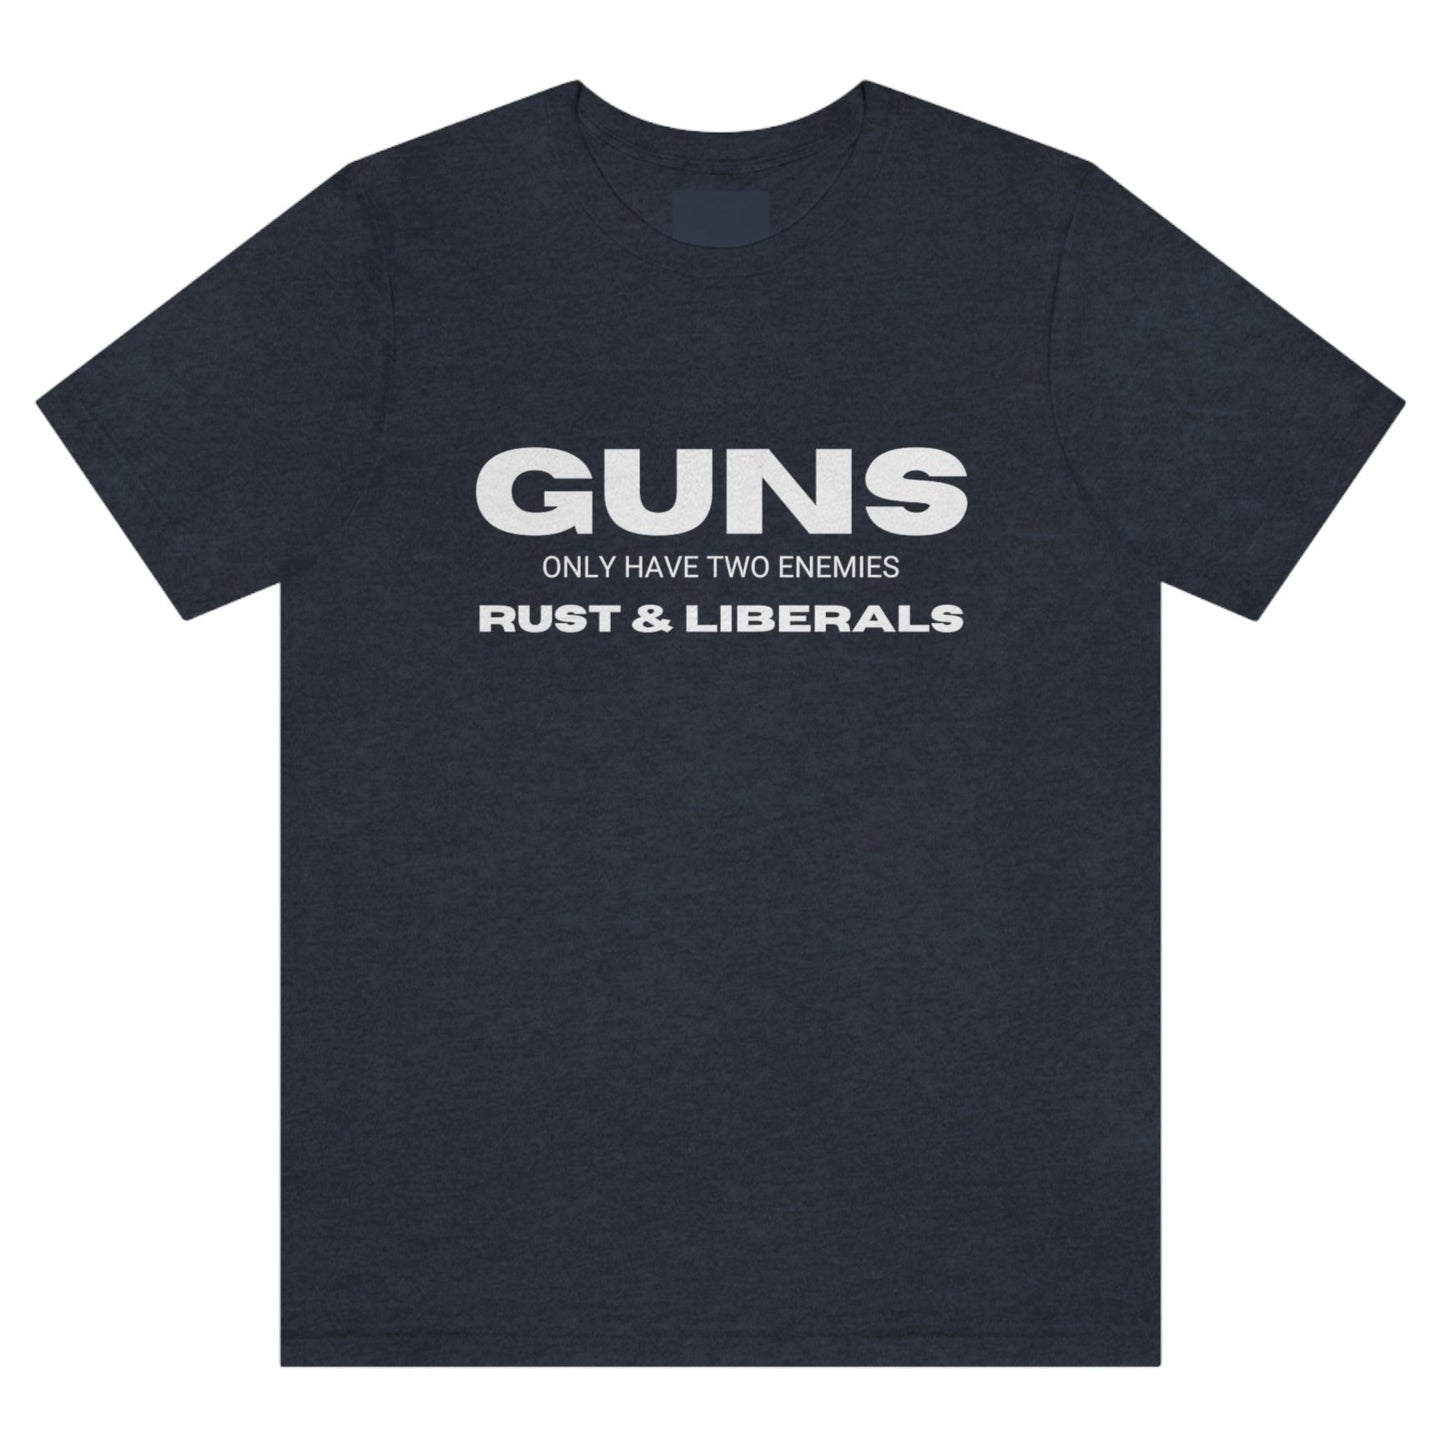 guns-only-have-two-enemies-rust-and-liberals-heather-navy-t-shirt-2a-second-amendment